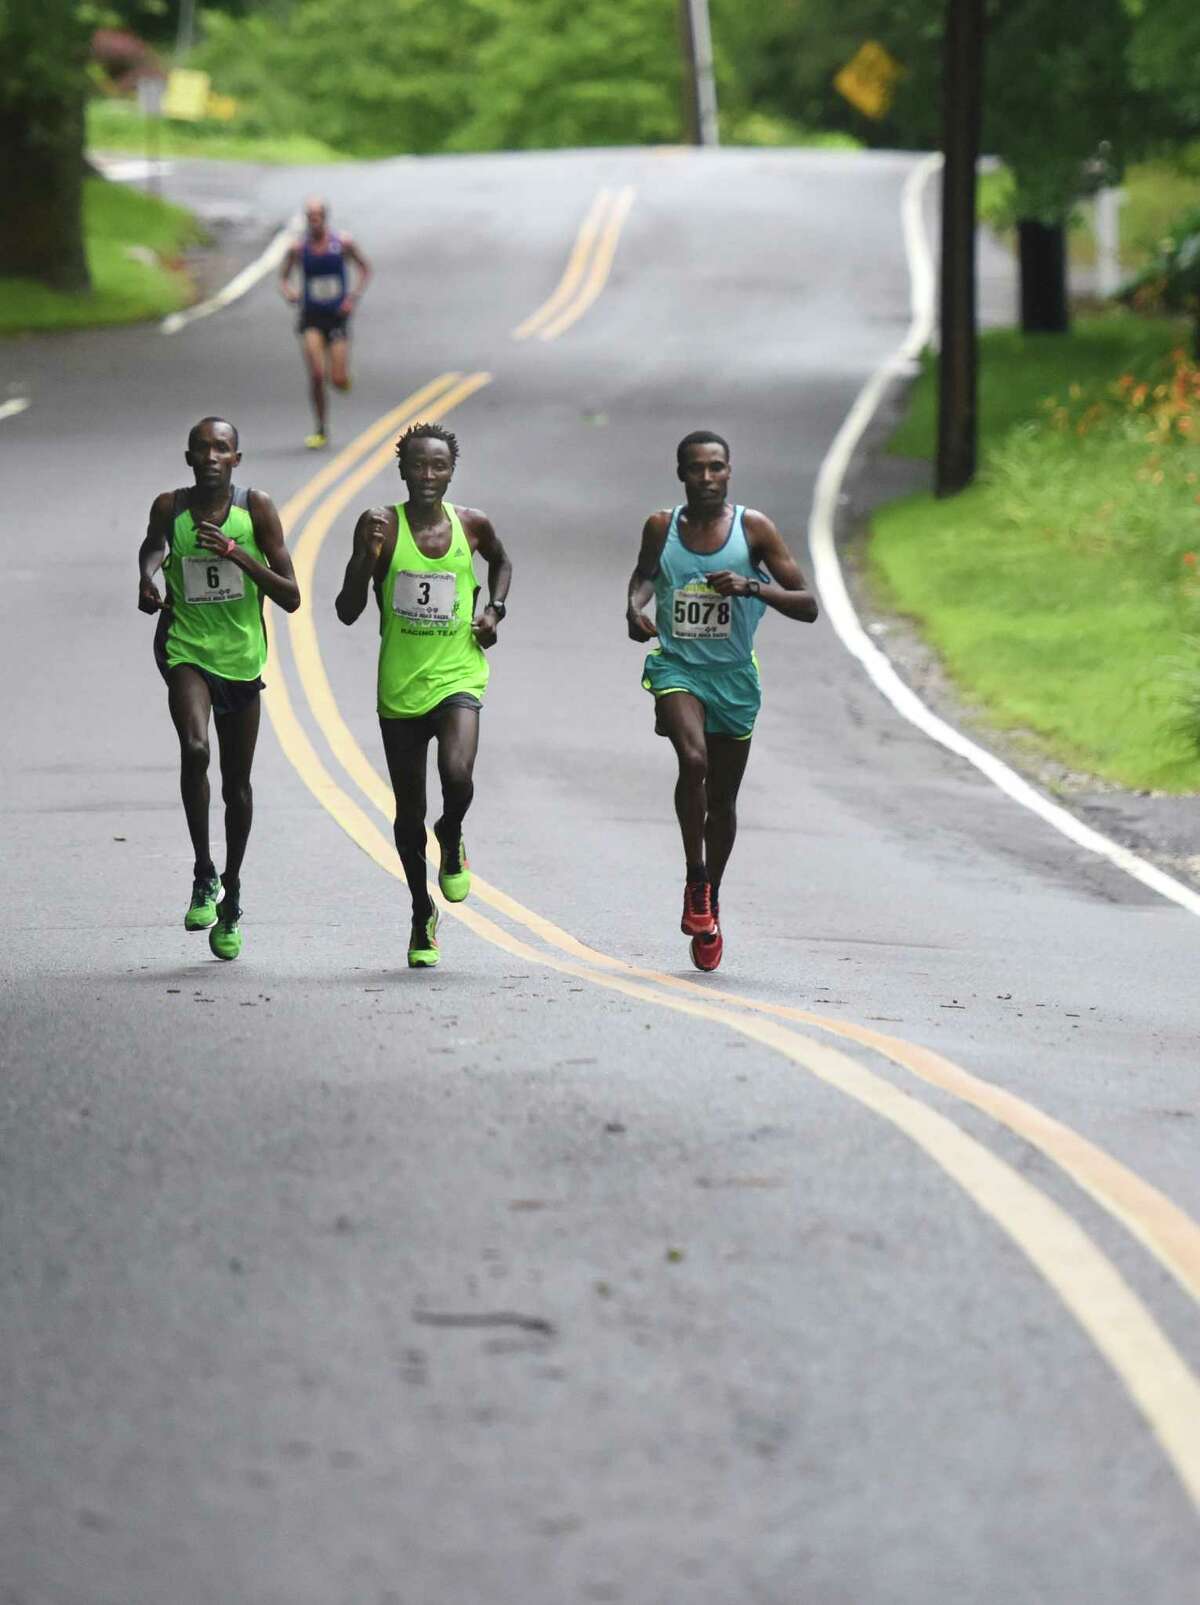 Second-place finisher Kenya's Josphat Kiptanui Too, left, third-place finisher Kenya's Eliud Ngetich, center, and race winner Ethiopia's Gosa Girma Tefera battle it out midway through the Faxon Law Group Fairfield Half Marathon at Jennings Beach in Fairfield, Conn. Sunday, June 28, 2015. Gosa Girma Tefera, of Ethiopia, was the first place overall finisher with a time of 1:04:05 and Etaferahu Temesgen, of Ethiopia, was the first female finisher with a time of 1:14:09.